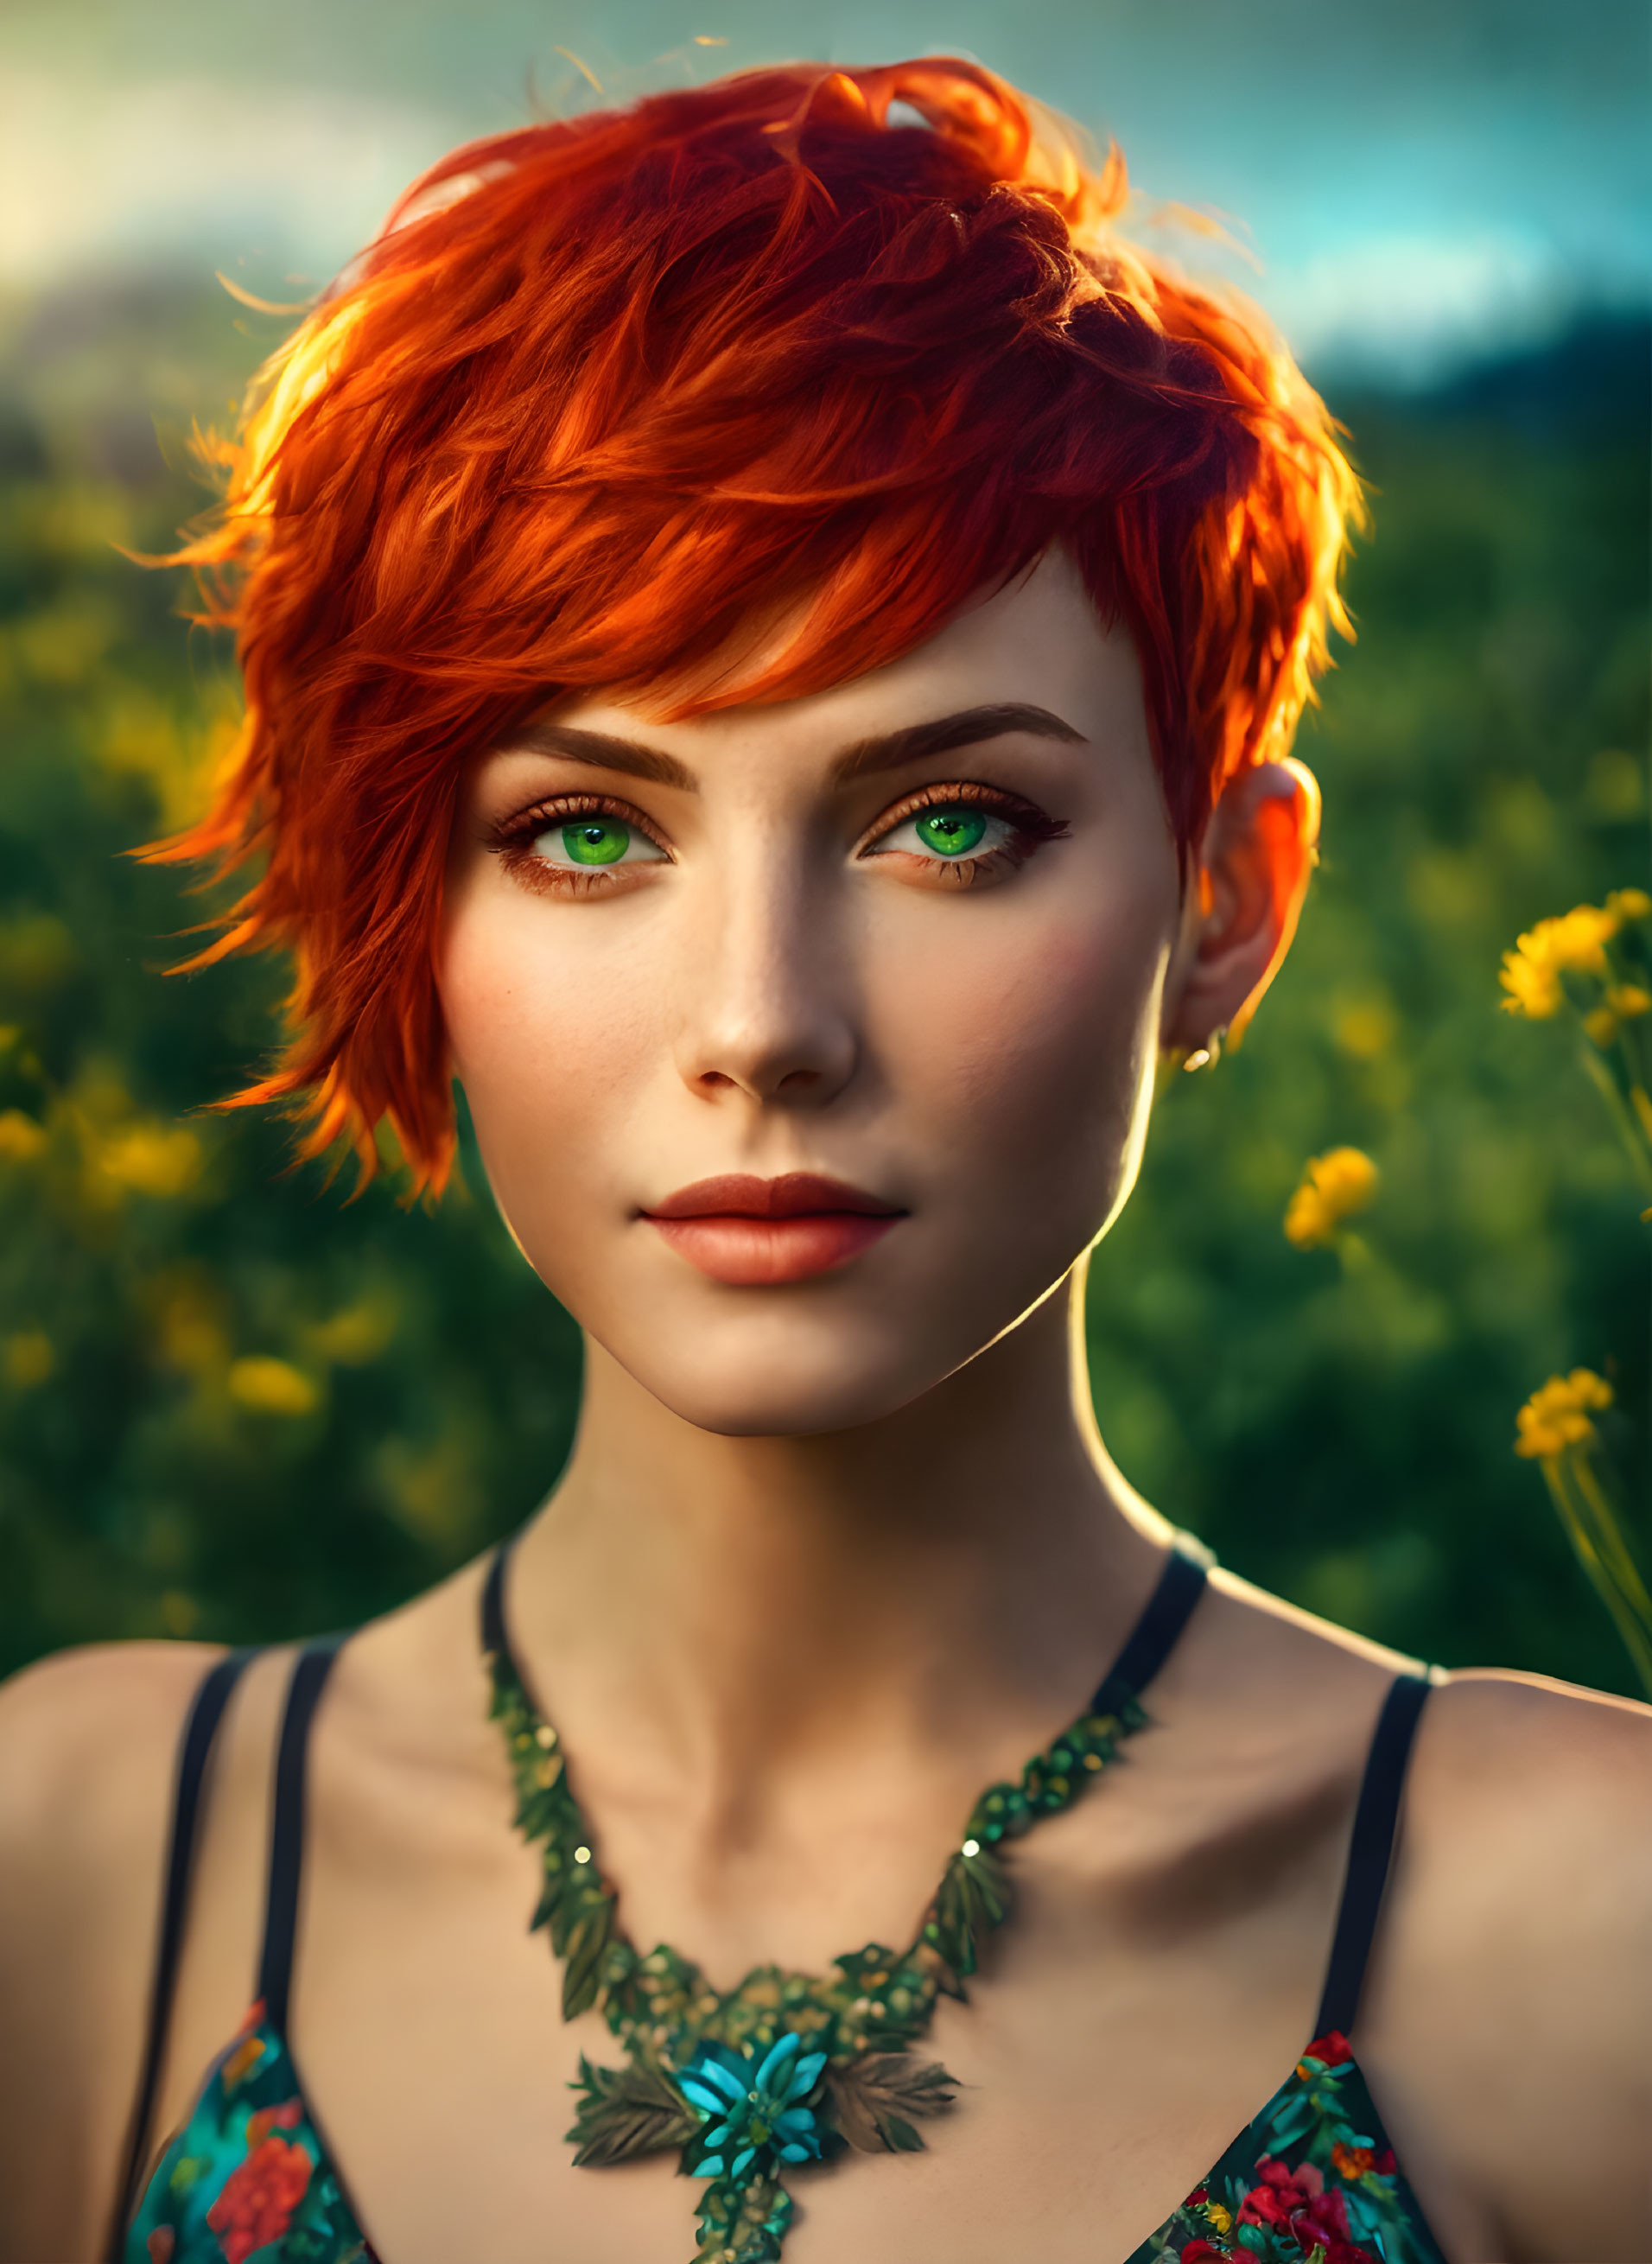 Girl with a realy short red haircut and green eyes